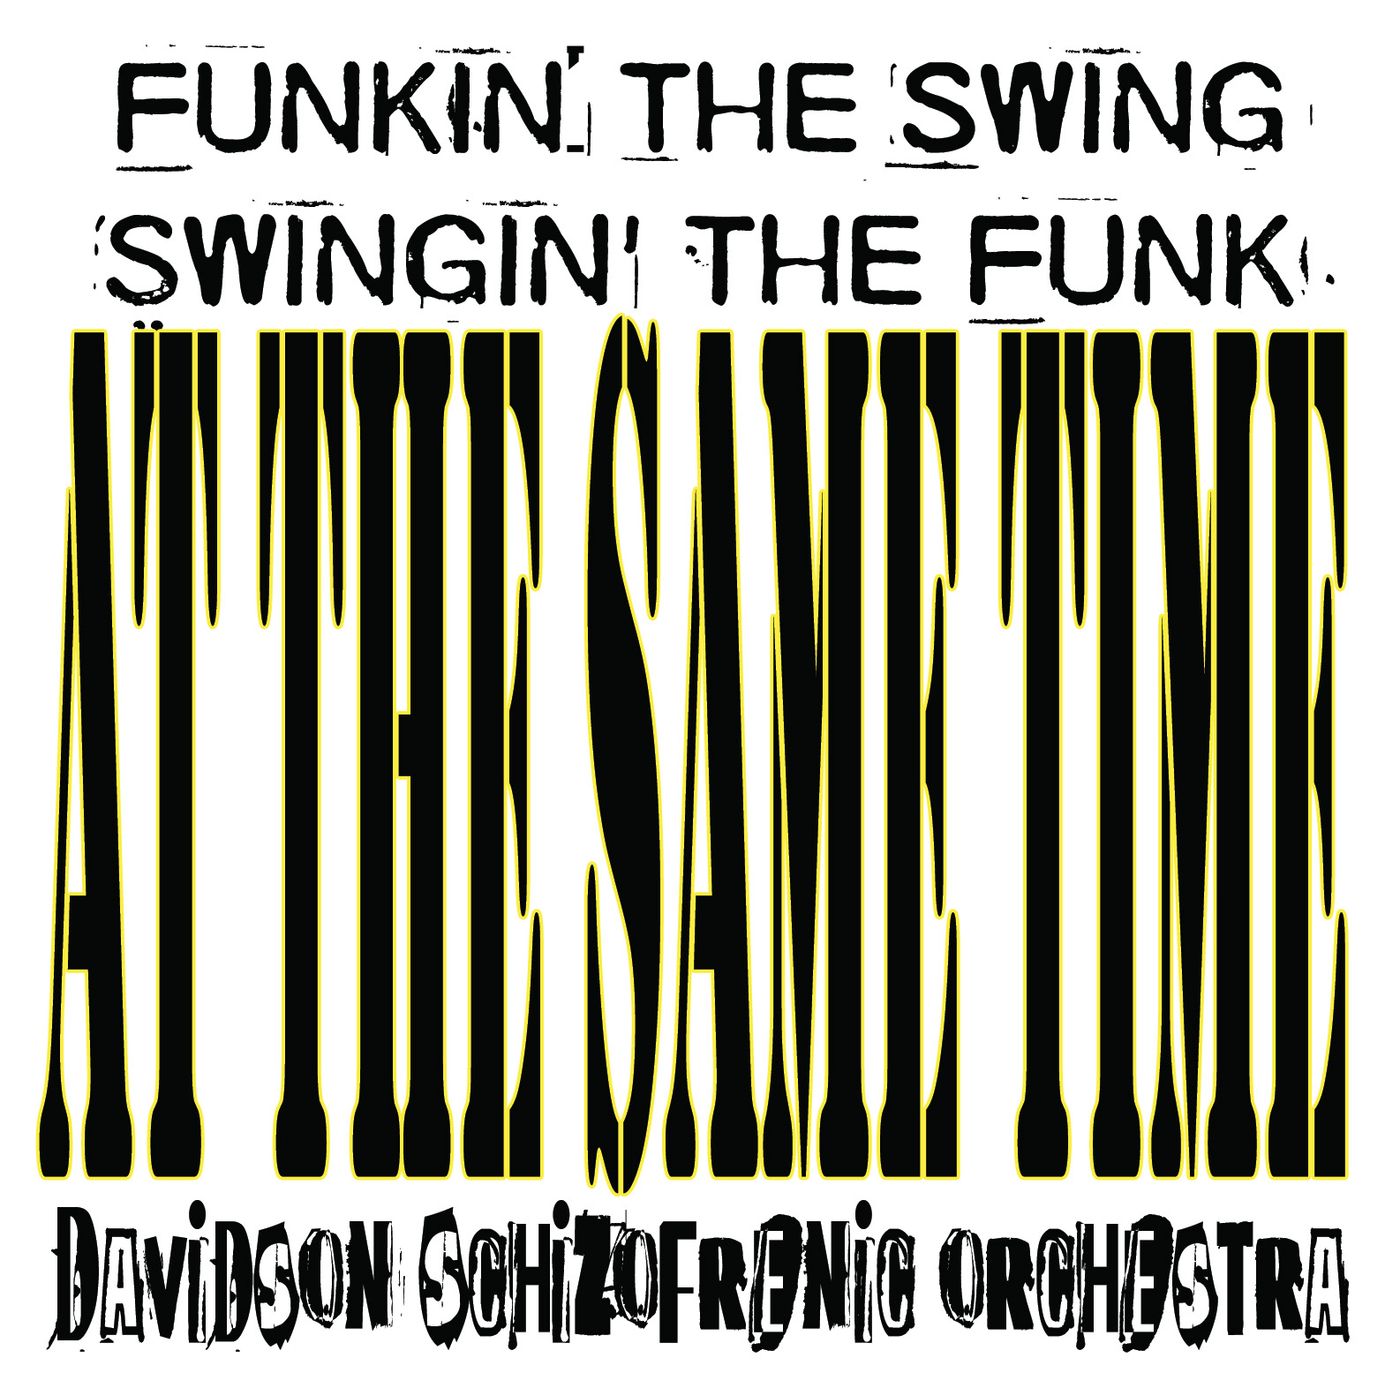 At The Same Time - Funkin' The Swing Swingin' The Funk -